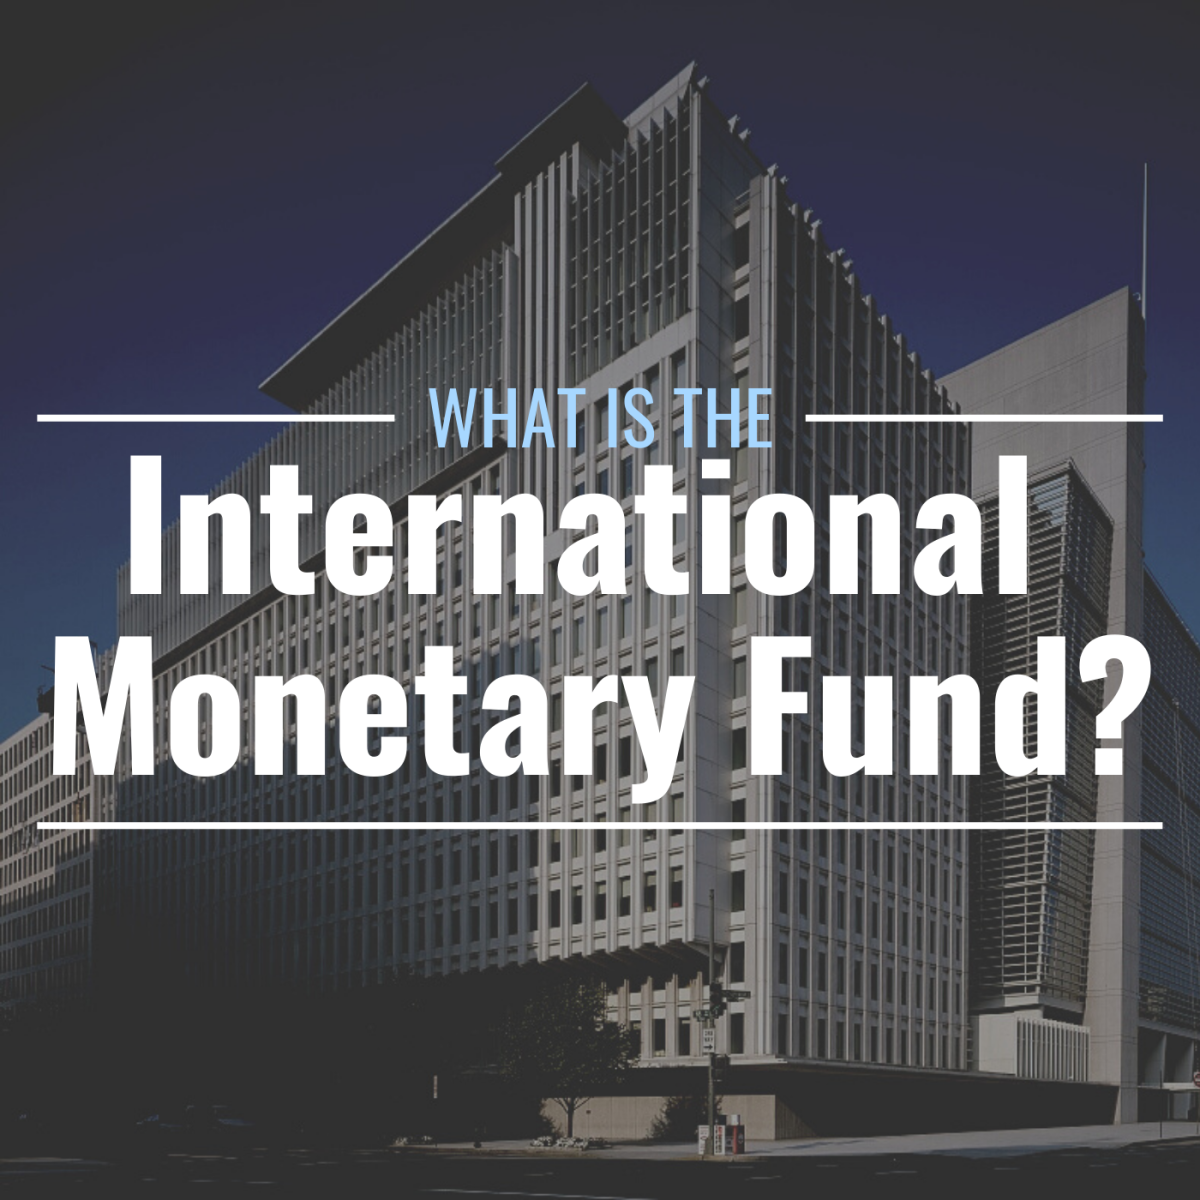 A darkened photo of the IMF headquarters in Washington, DC, with text overlay that reads "What Is the International Monetary Fund?"